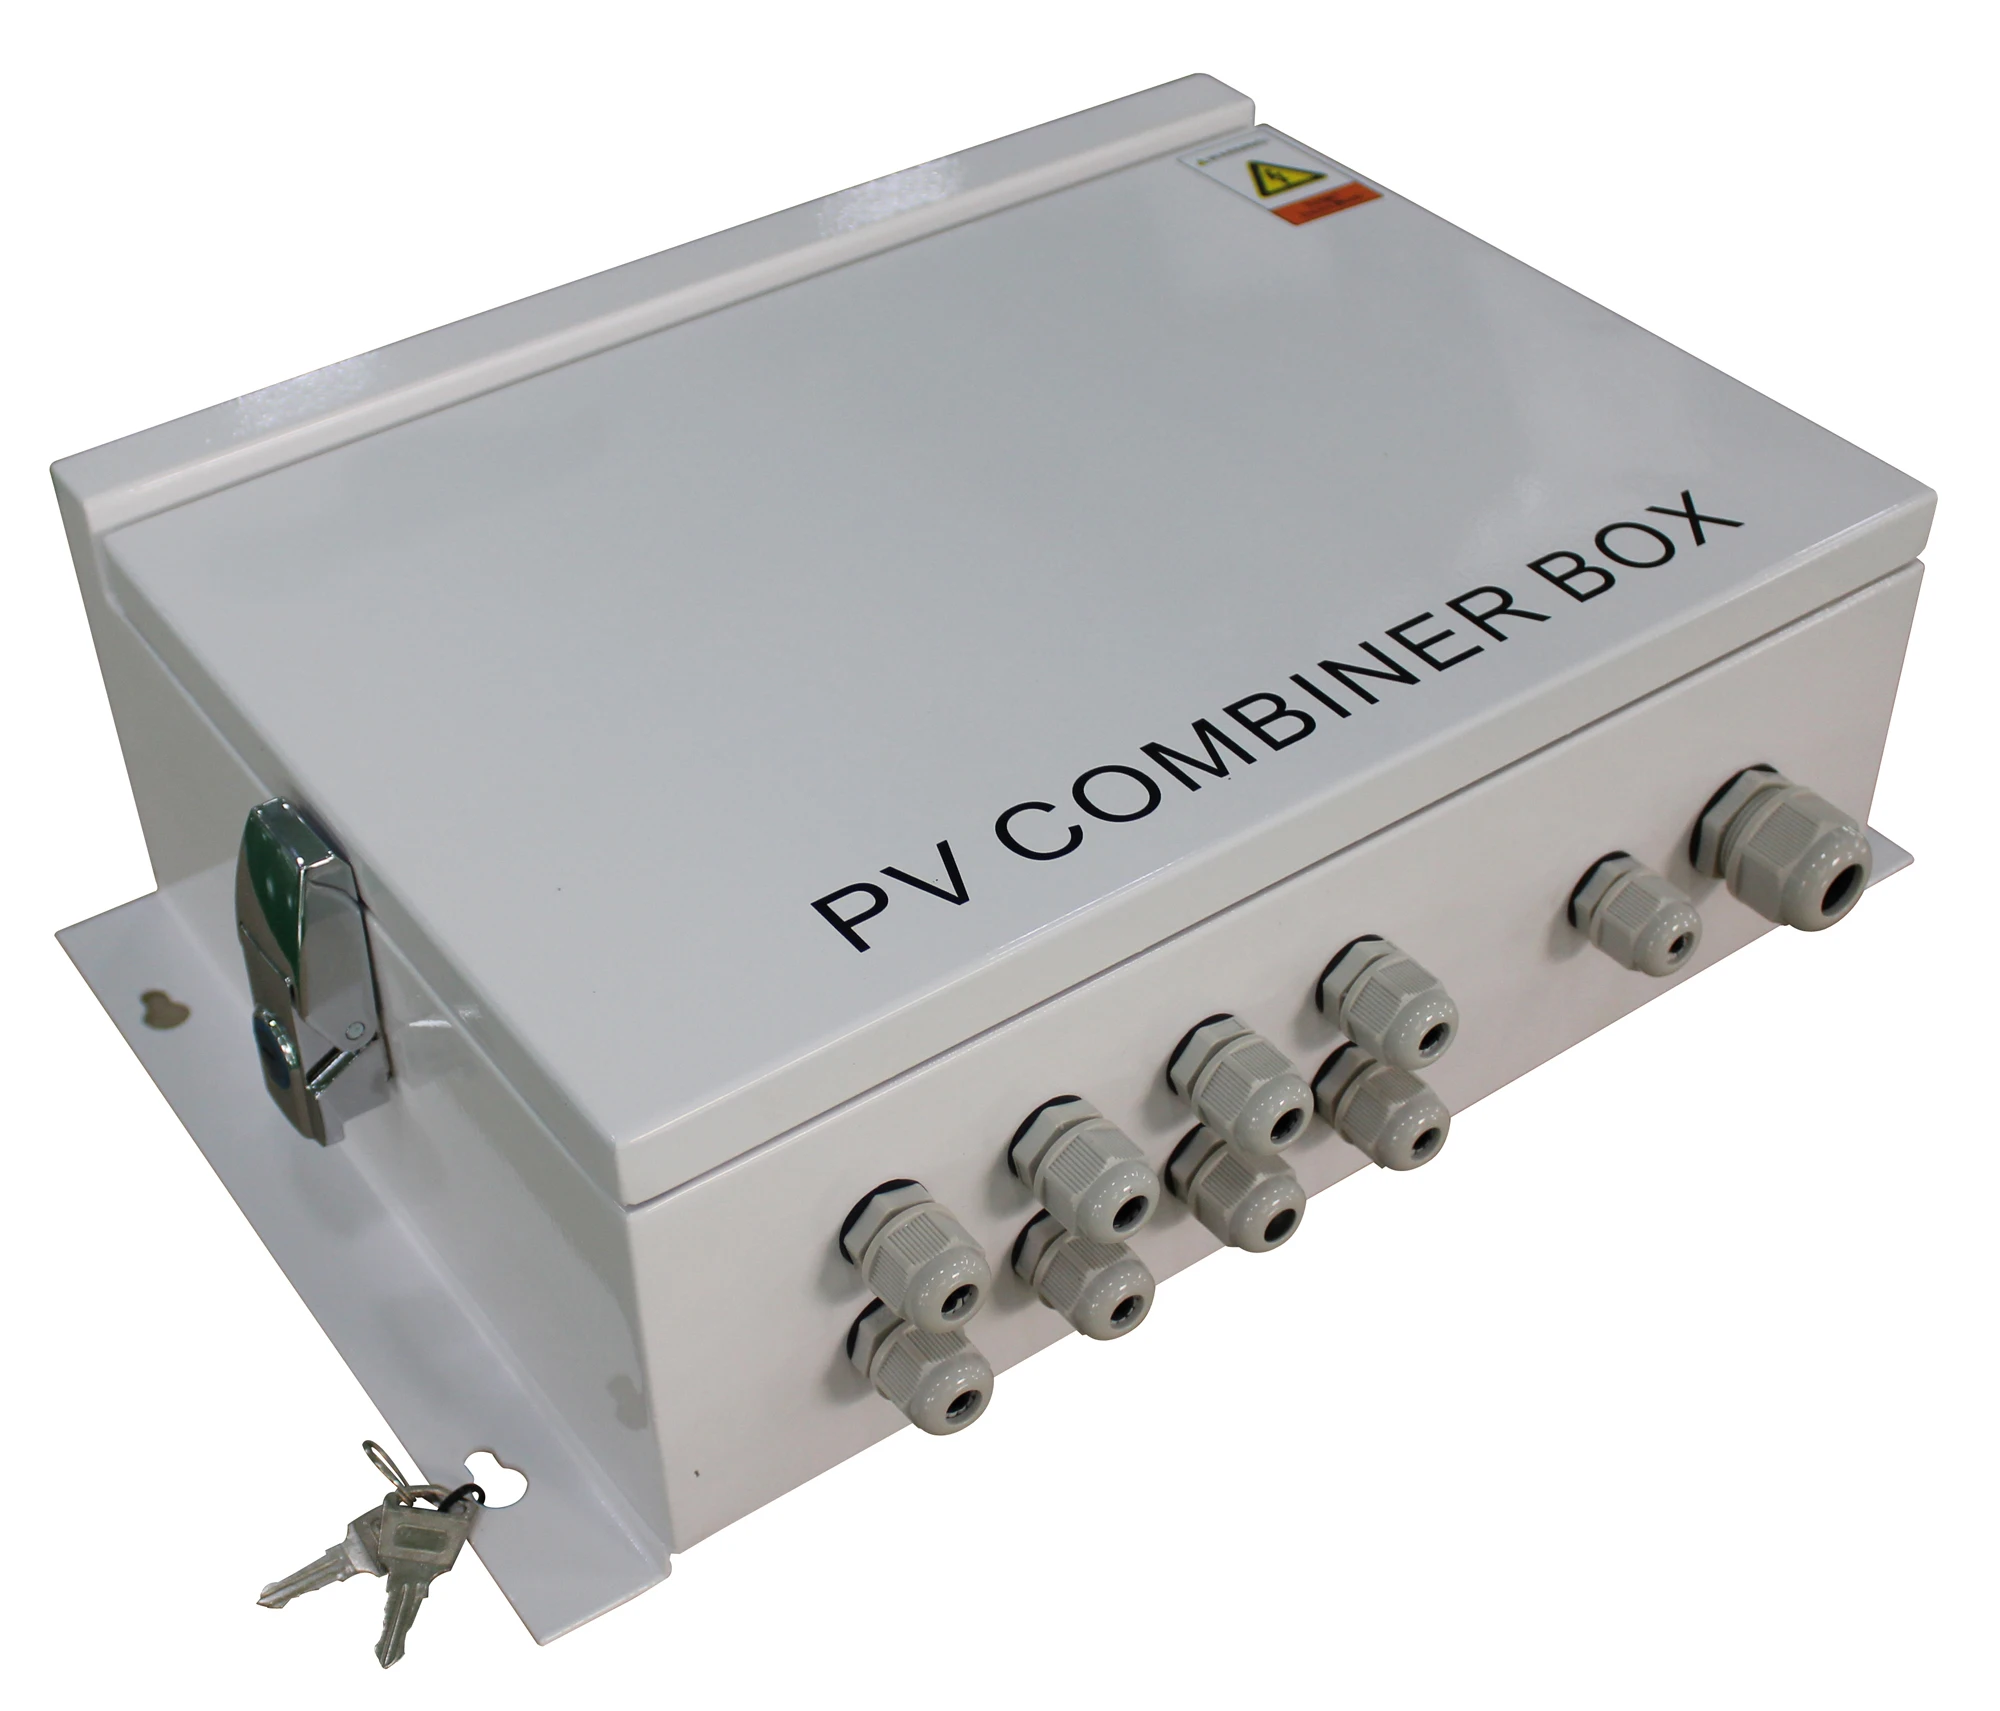 
LIGHTING PROTECTION 4 IN 1 OUT PV COMBINER BOX FOR SOLAR POWER SYSTEM 